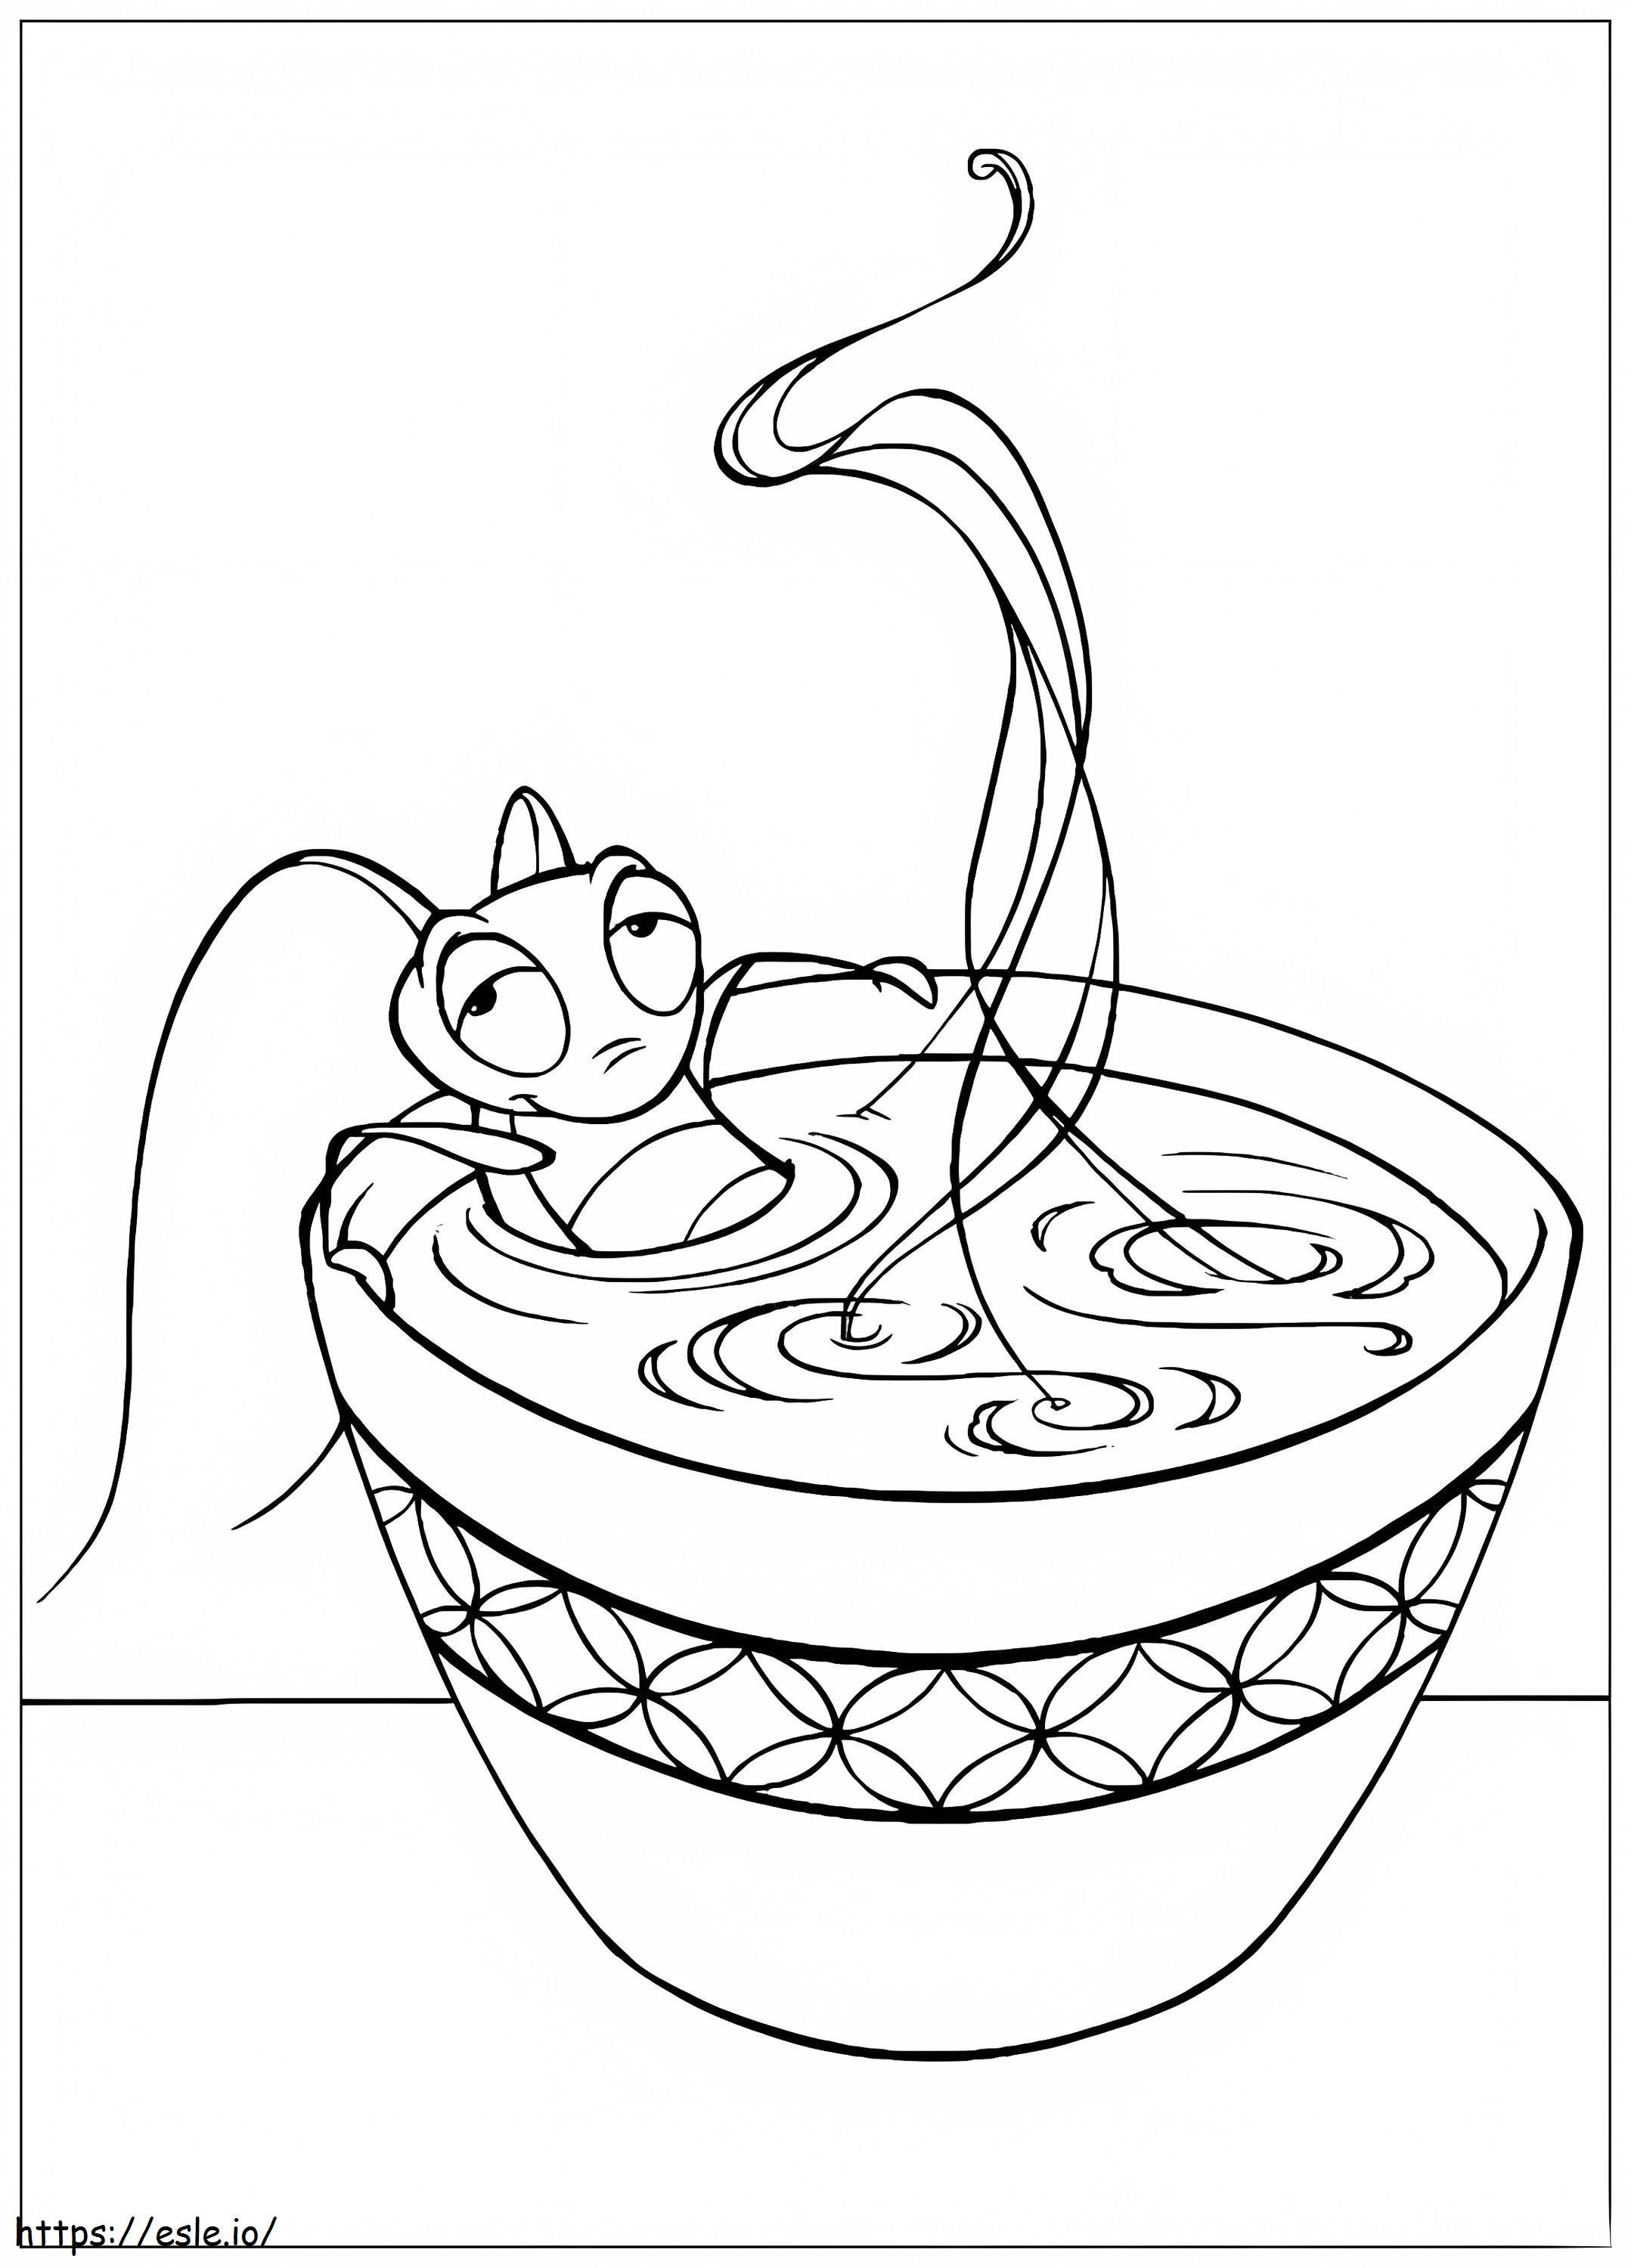 Funny Cricket coloring page